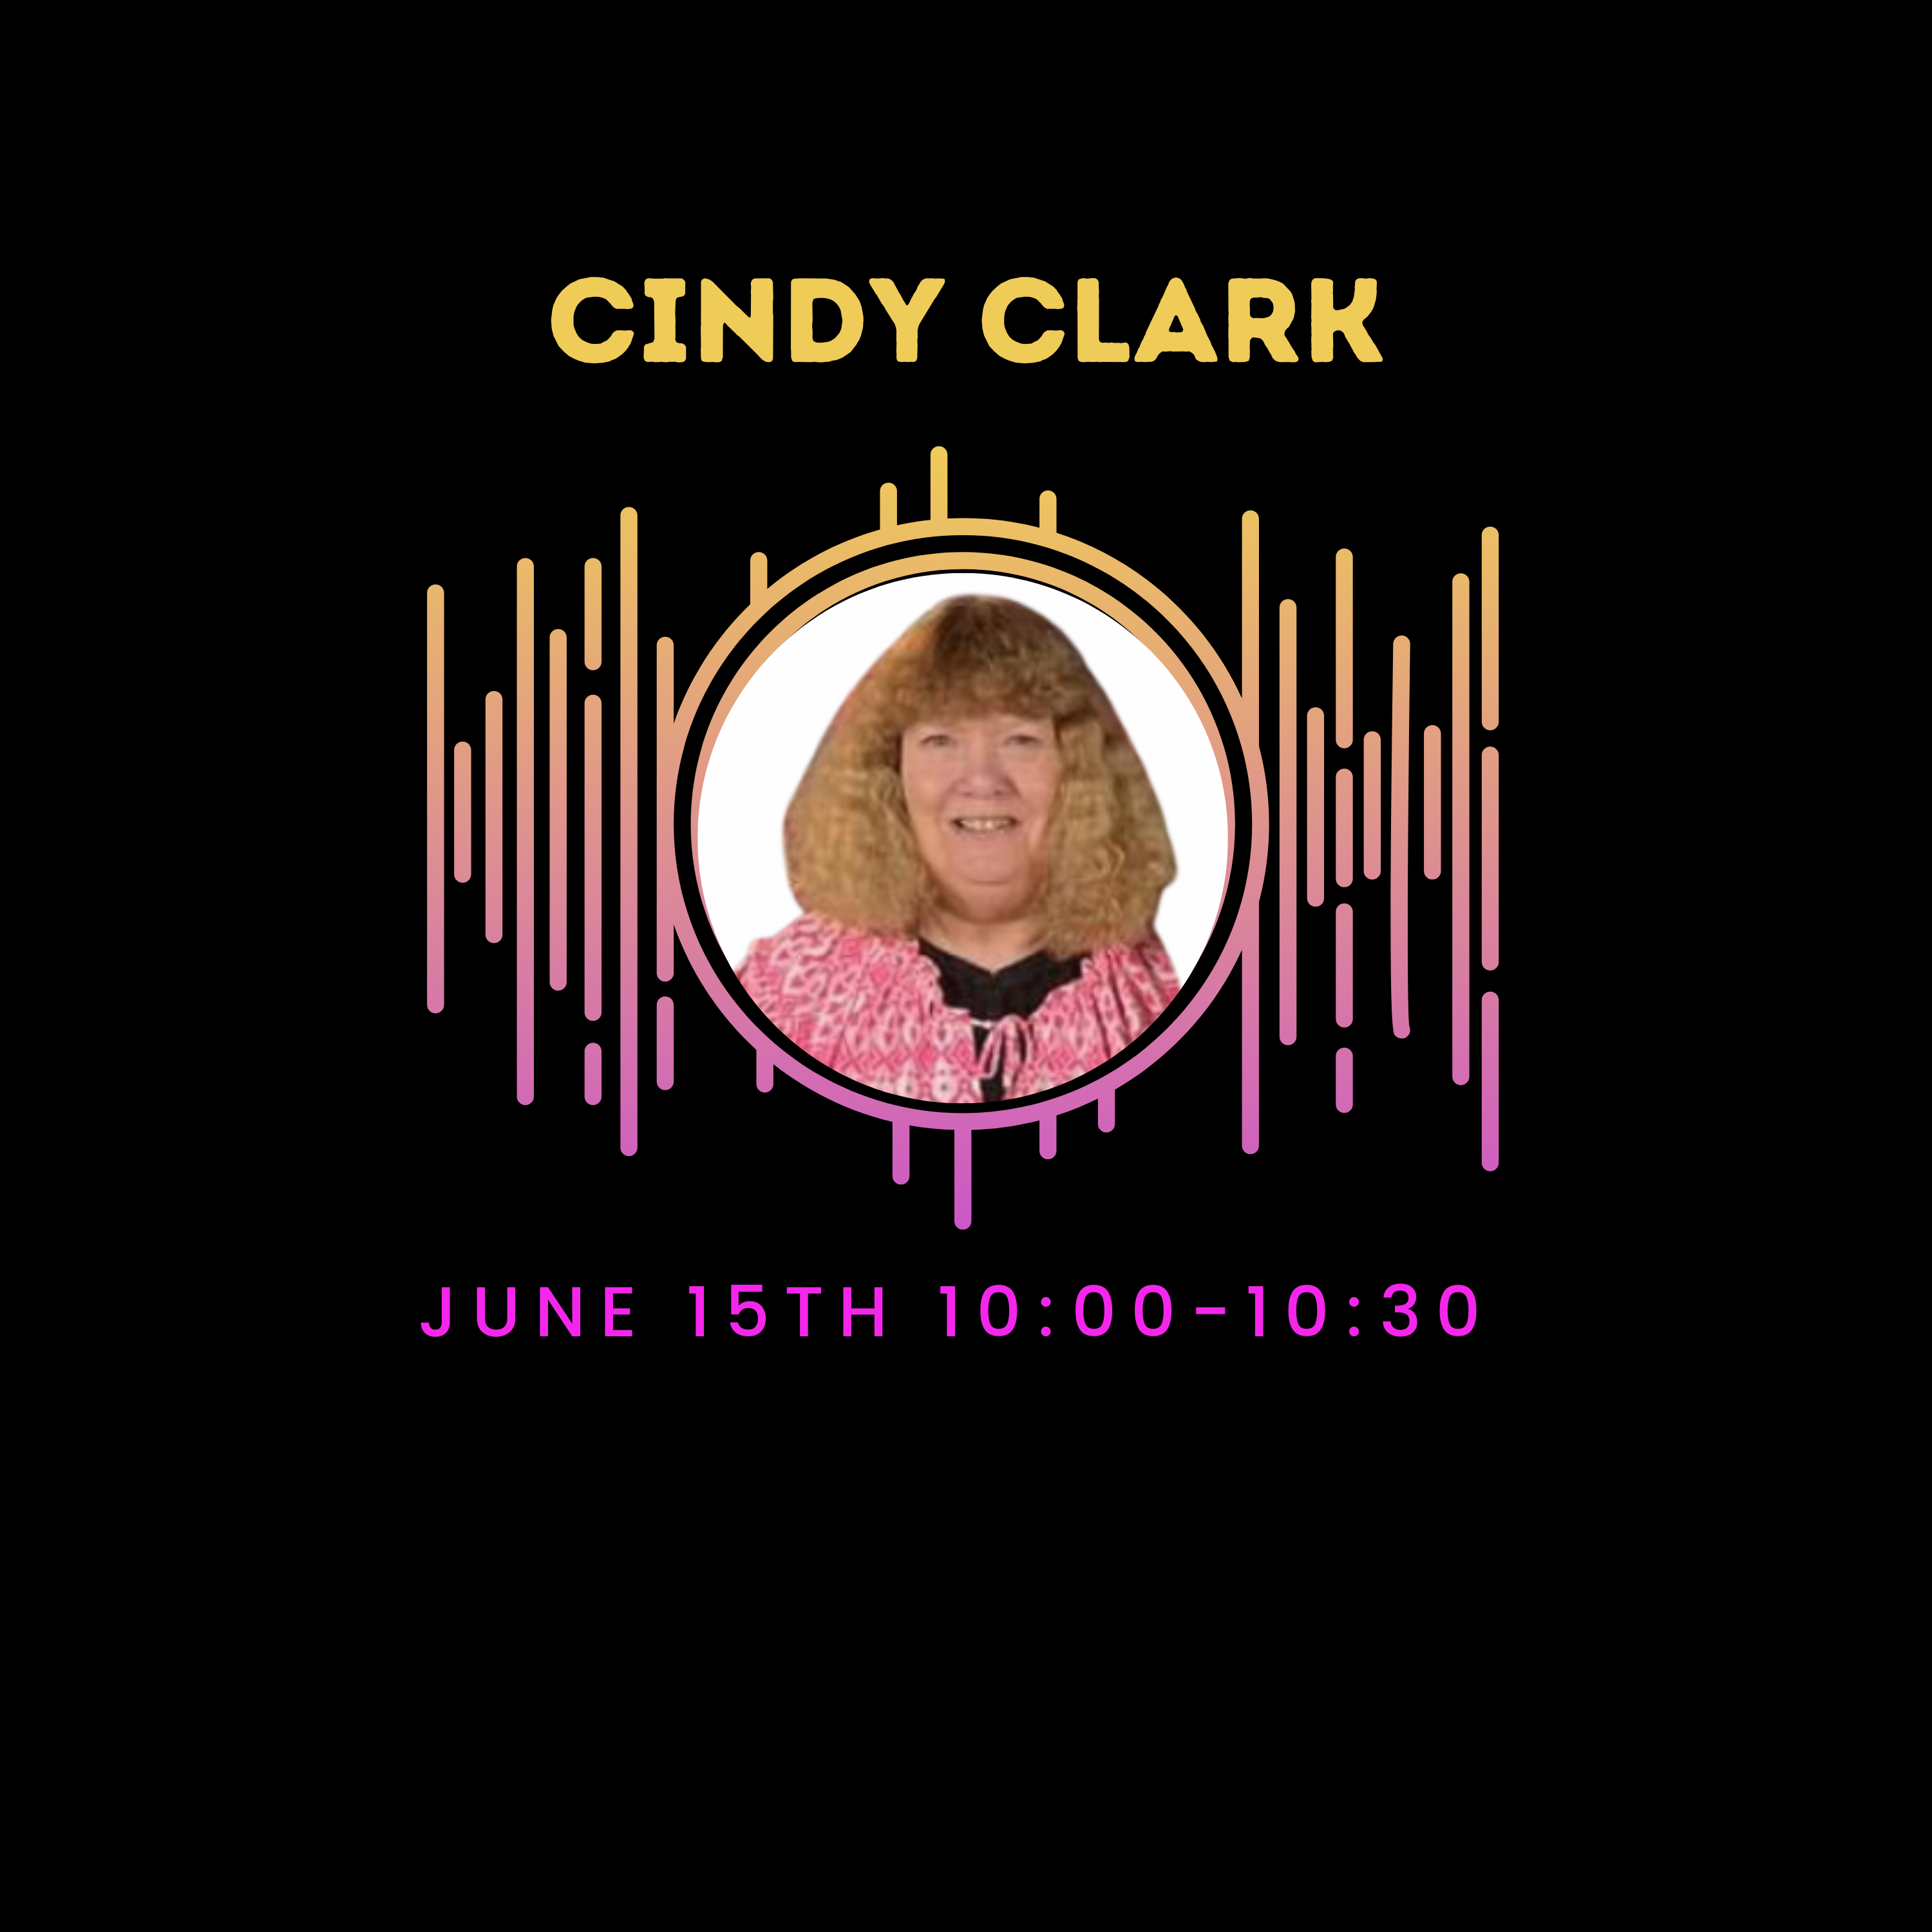 Promotional graphic for the Reflect Live Podcast featuring a portrait of Cindy Clark, encircled by a pink and orange waveform graphic. The text above her photo reads 'CINDY CLARK' in bold yellow letters. The date and time of her podcast appearance, 'JUNE 15TH 10:00–10:30AM', are displayed below her image, set against a black background. This image is used to advertise an upcoming interview segment with Cindy Clark on the podcast